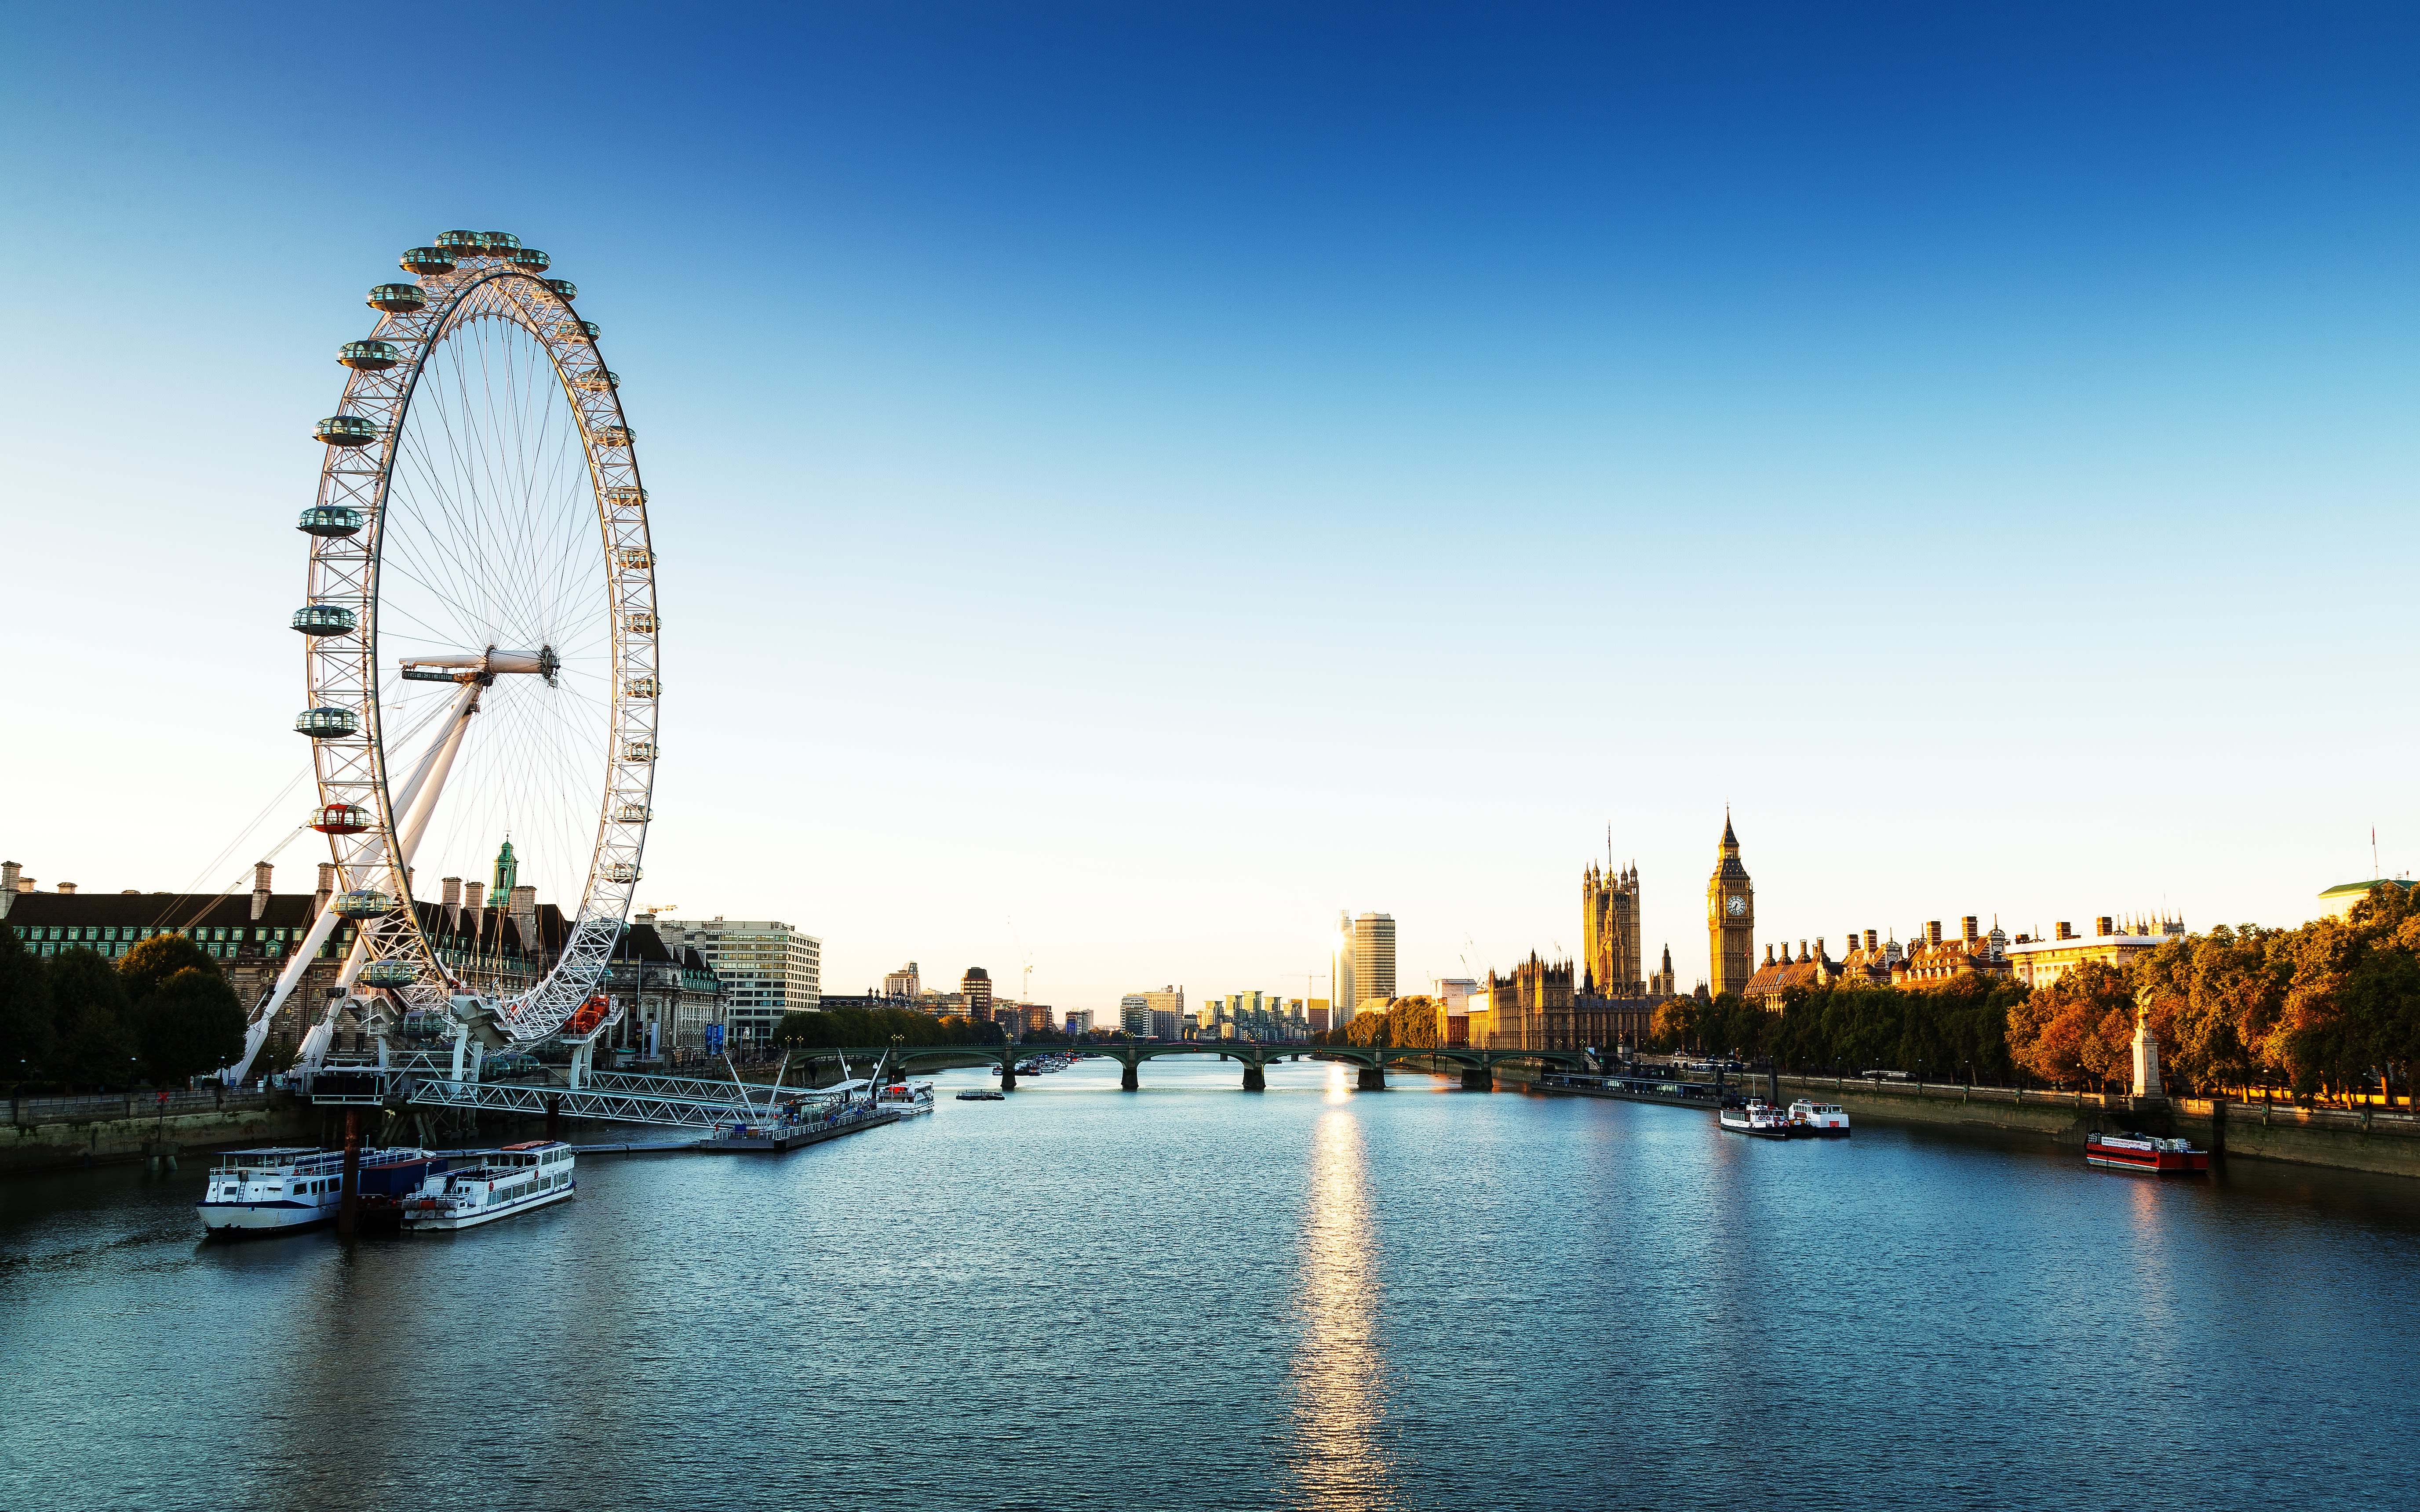 An image of the River Thames with the London Eye and the Houses of Parliament in view.